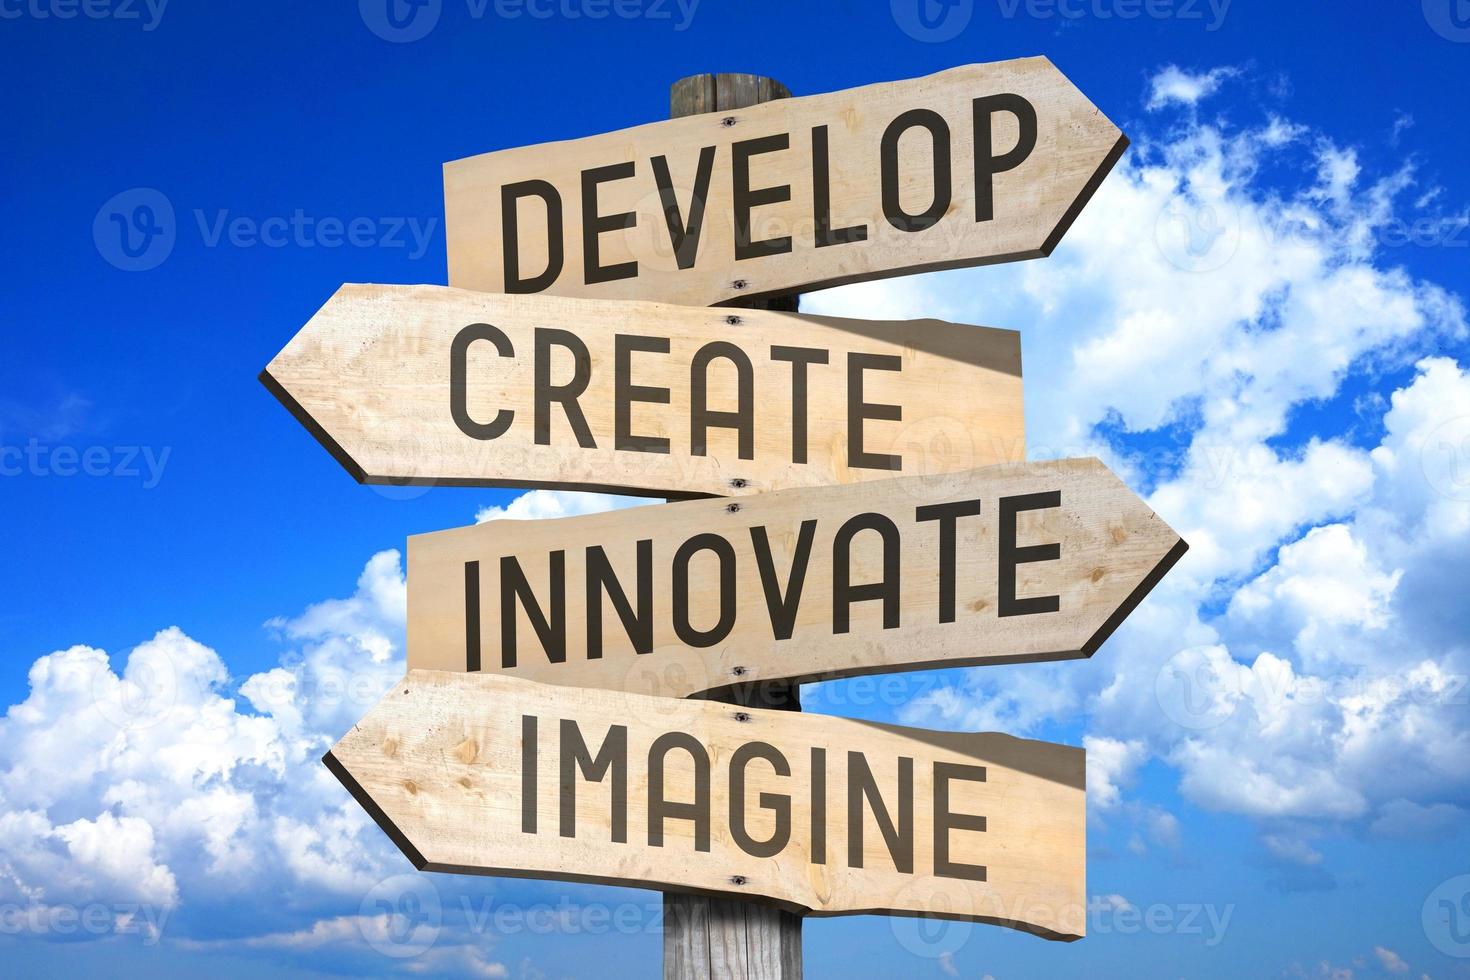 Develop, Create, innovate, Imagine - Wooden Signpost with Four Arrows, Sky with Clouds in Background photo